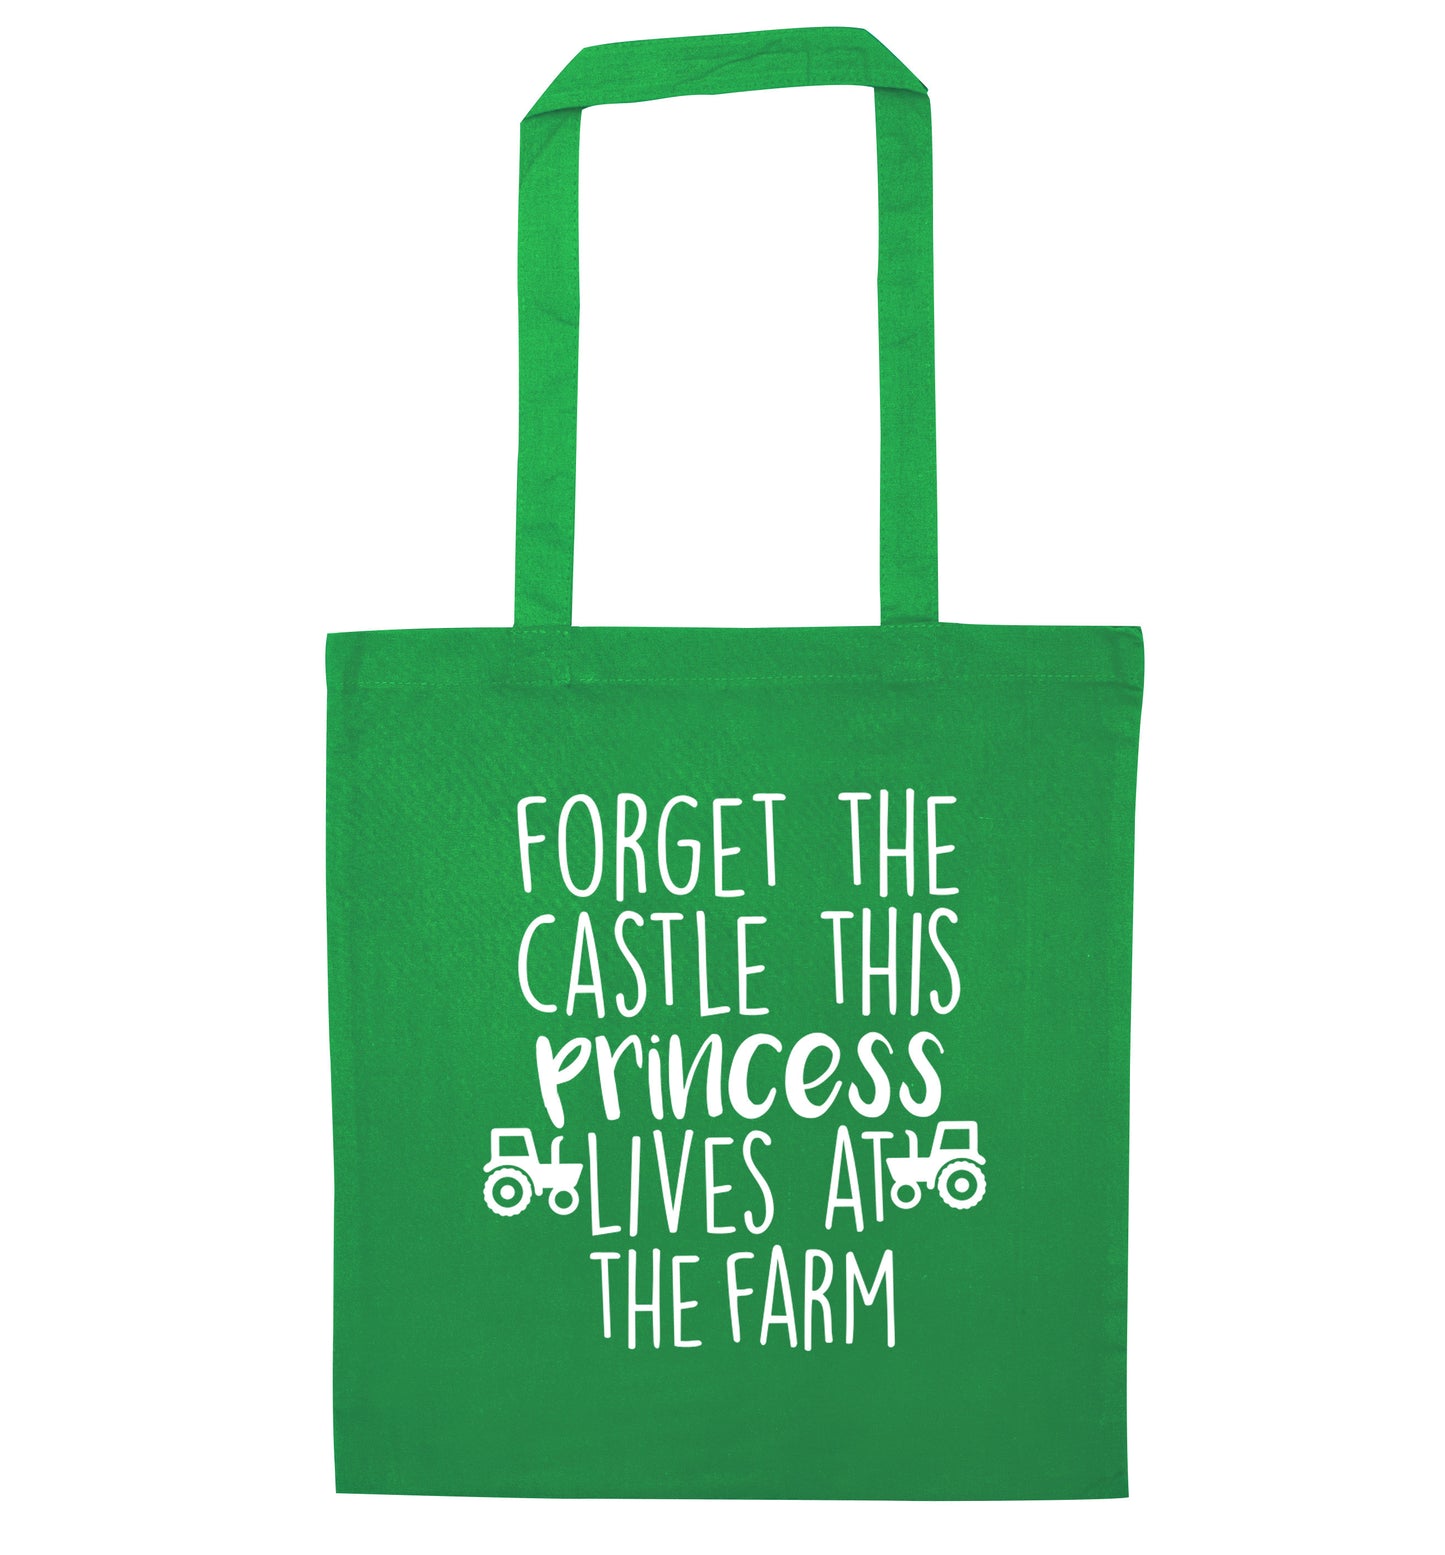 Forget the castle this princess lives at the farm green tote bag